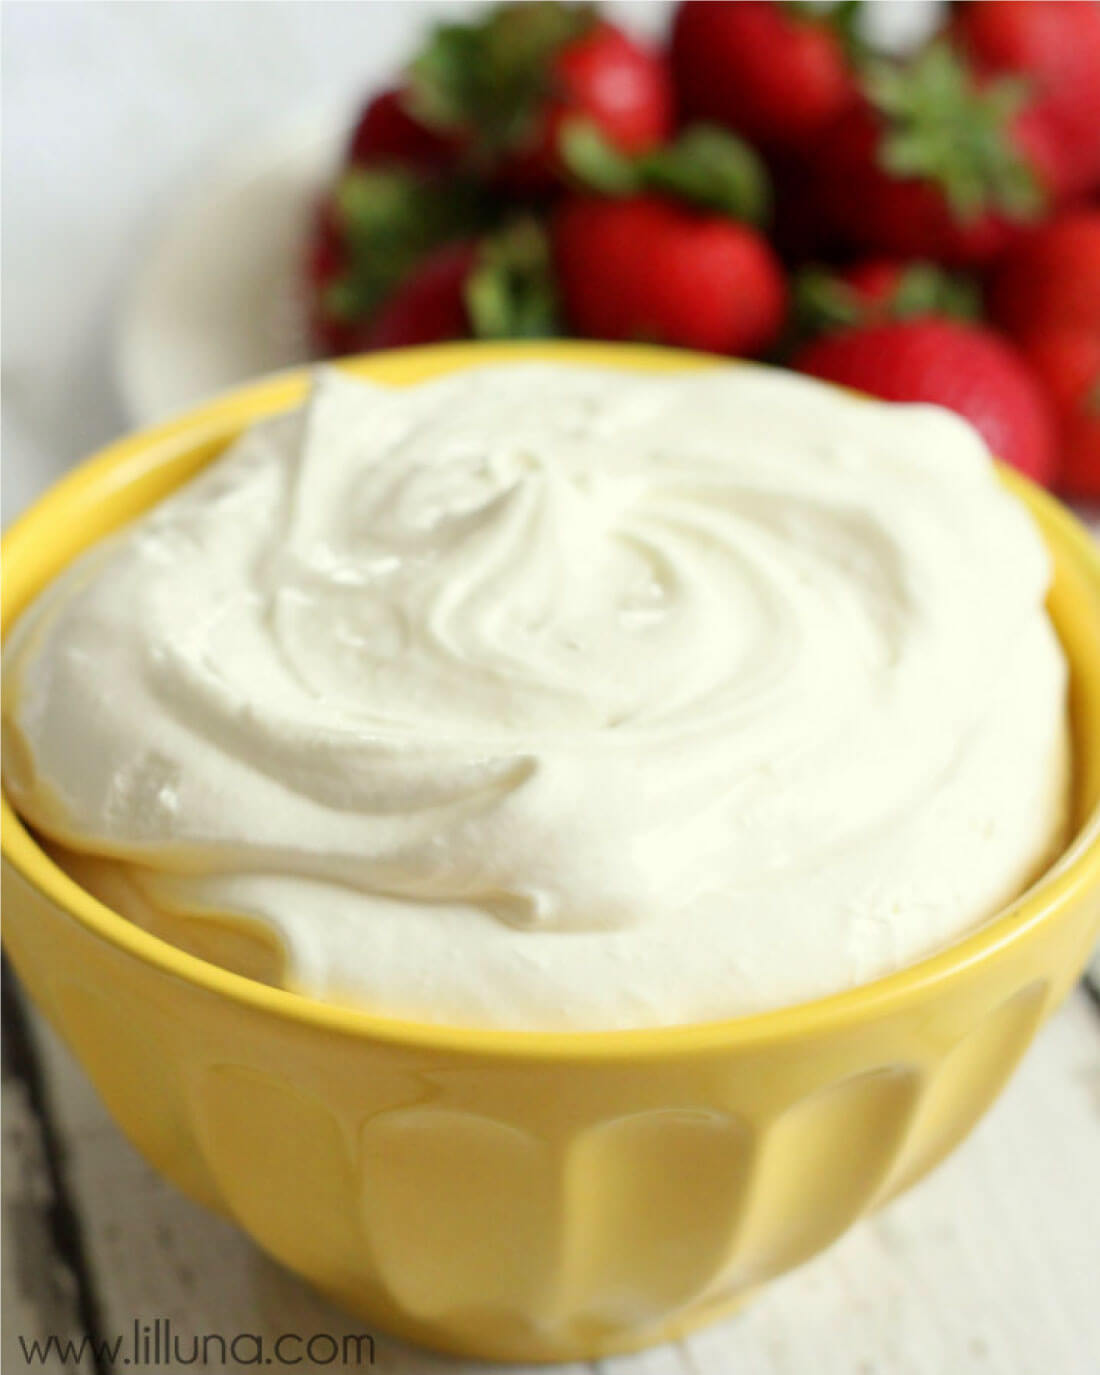 Cream Cheese Fruit Dip - a simple sweet recipe that everyone will love and you'll want to make again and again. from Lil Luna via www.thirtyhandmadedays.com